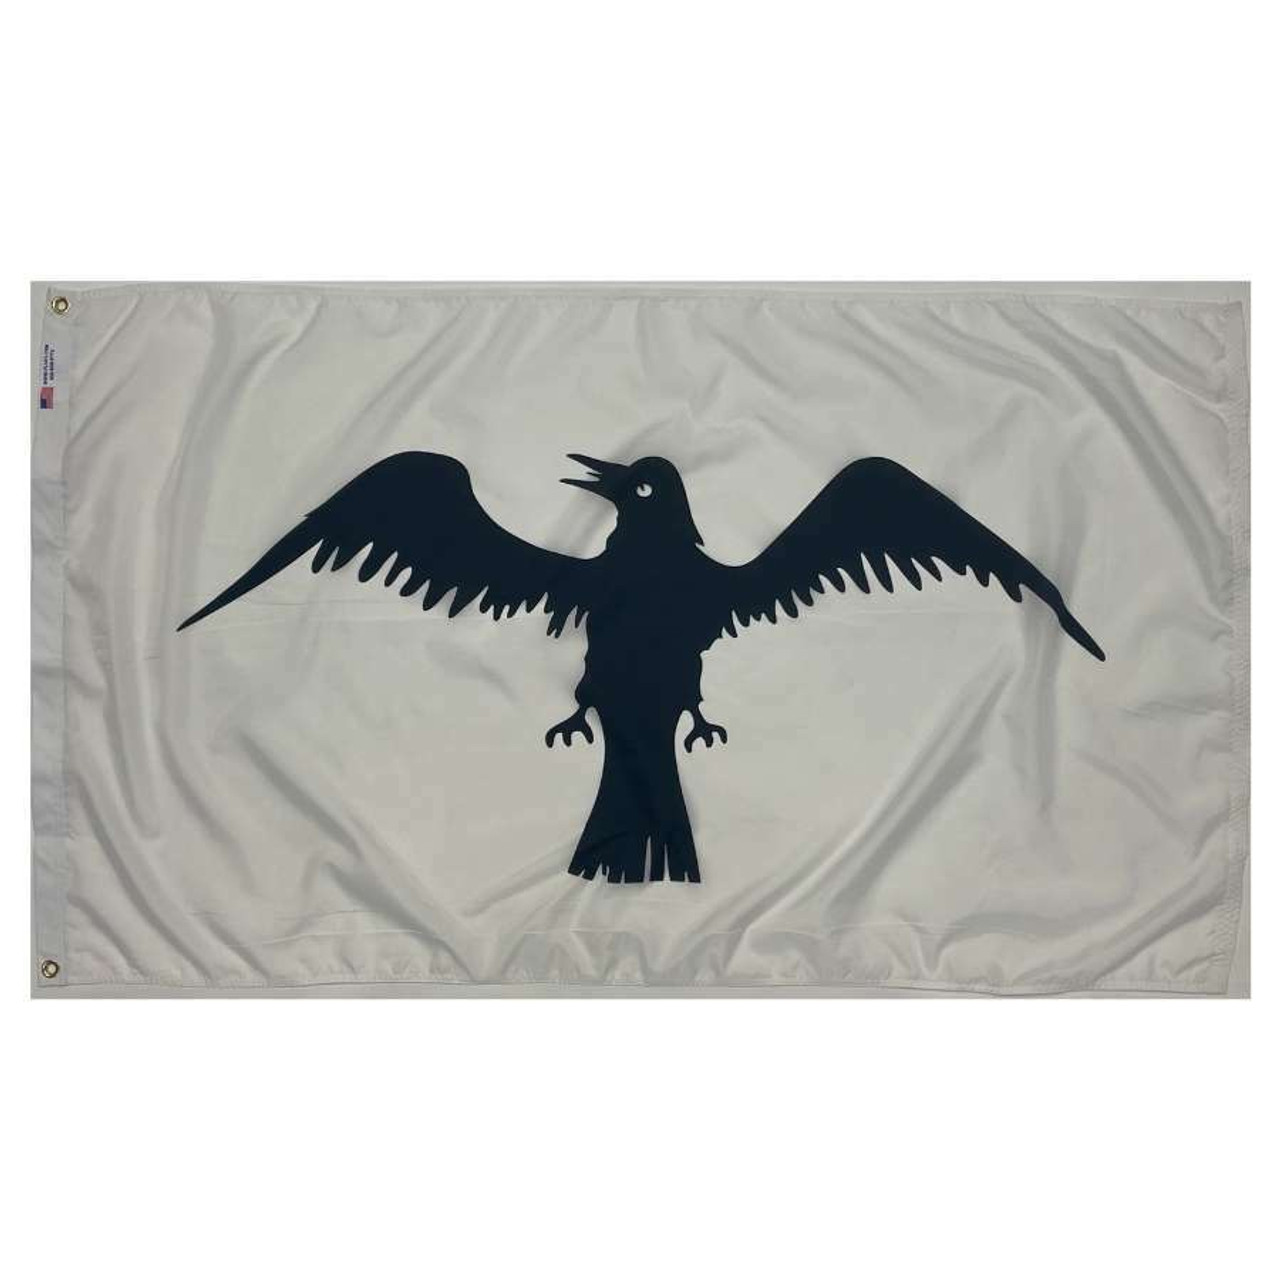 The Raven flag consists of a white background with a stylized runic black raven in its center. It has a canvas header with brass grommets.